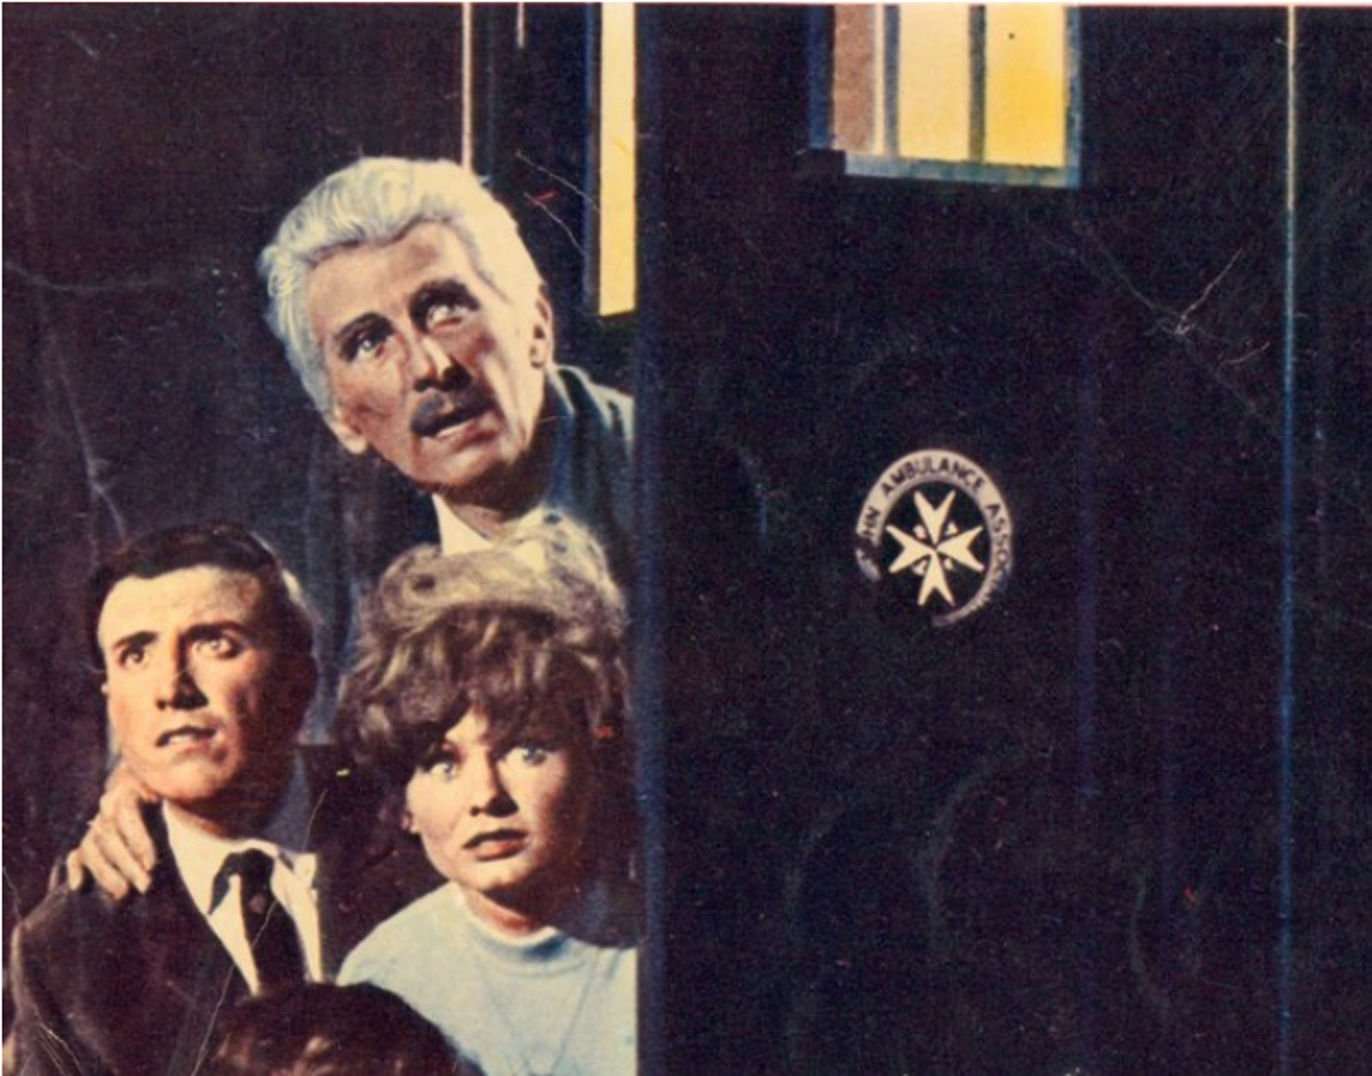 St John Ambulance Plaque from Dr Who and the Daleks Lobby Card.jpg